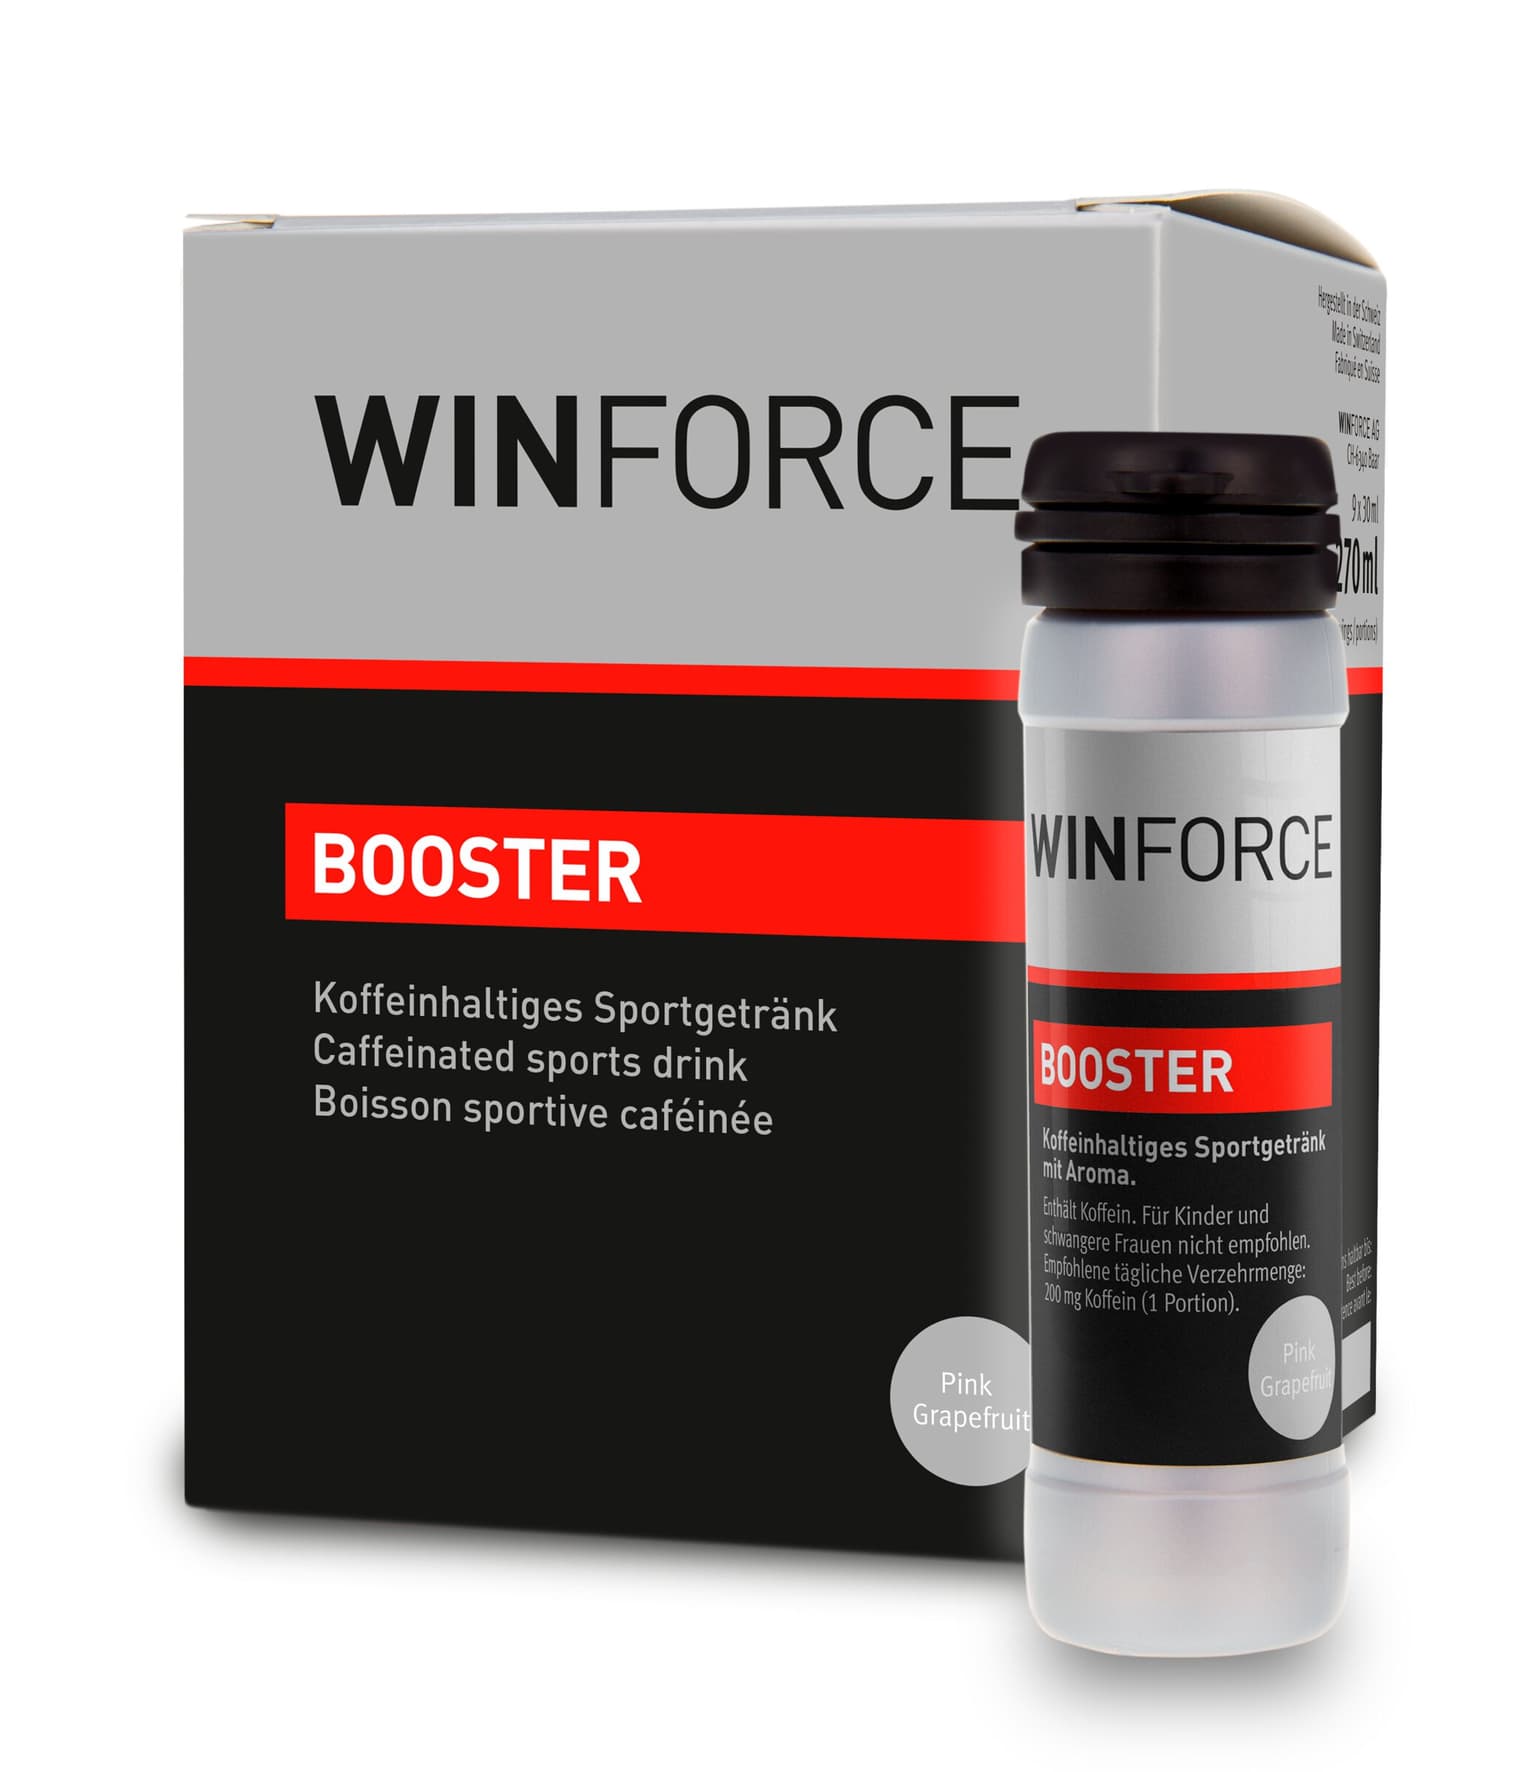 Winforce Winforce Booster Booster policromo 1